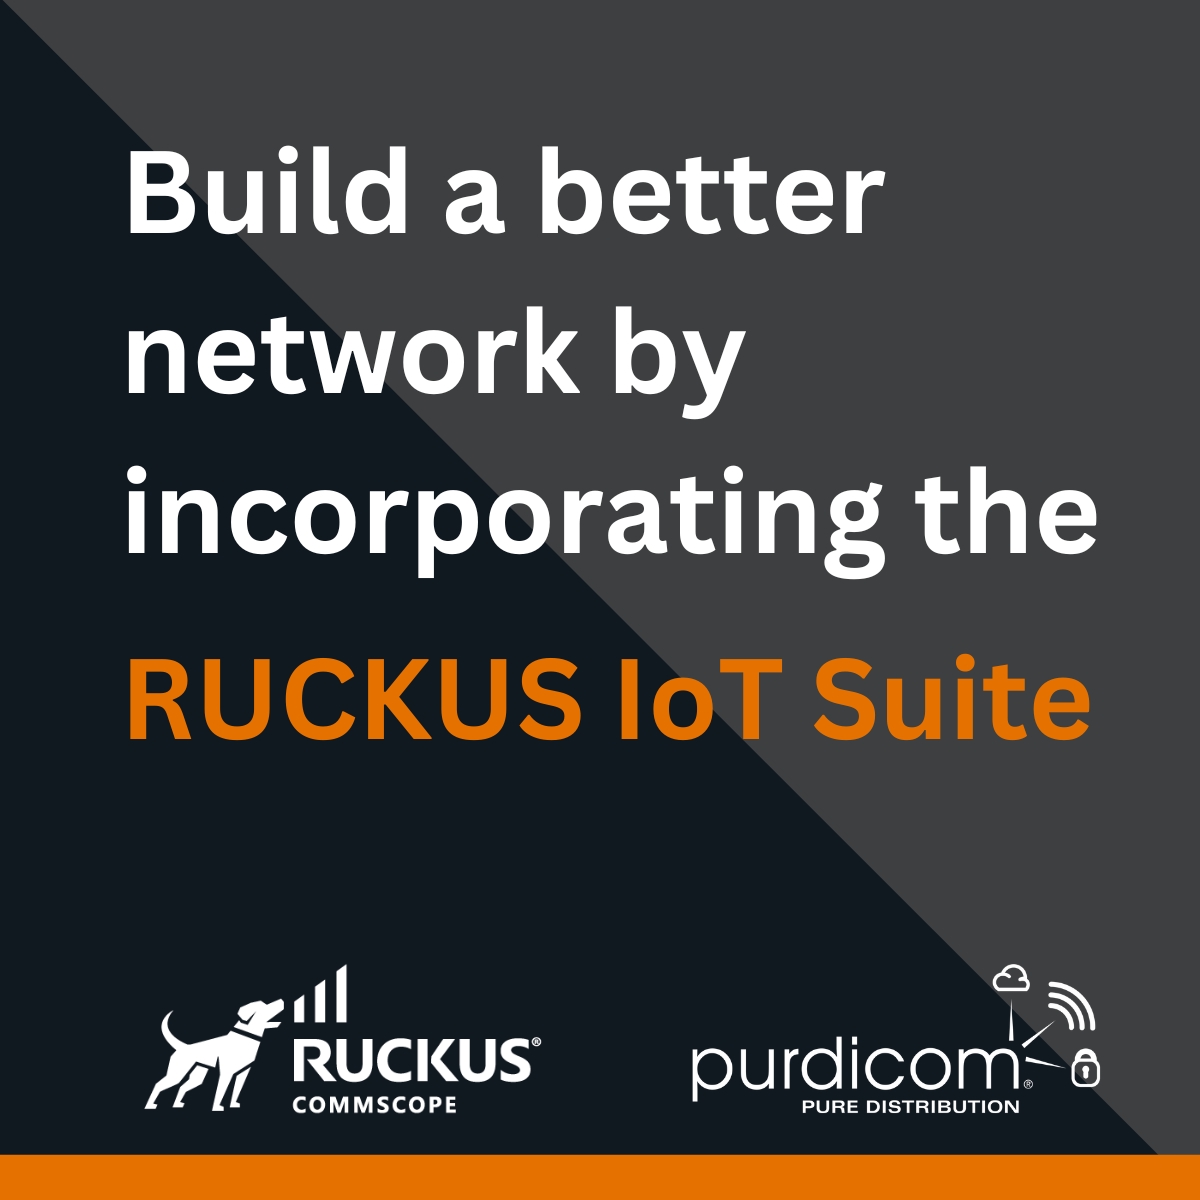 RUCKUS IoT Suite: Simplify, visualise and automate your IoT network